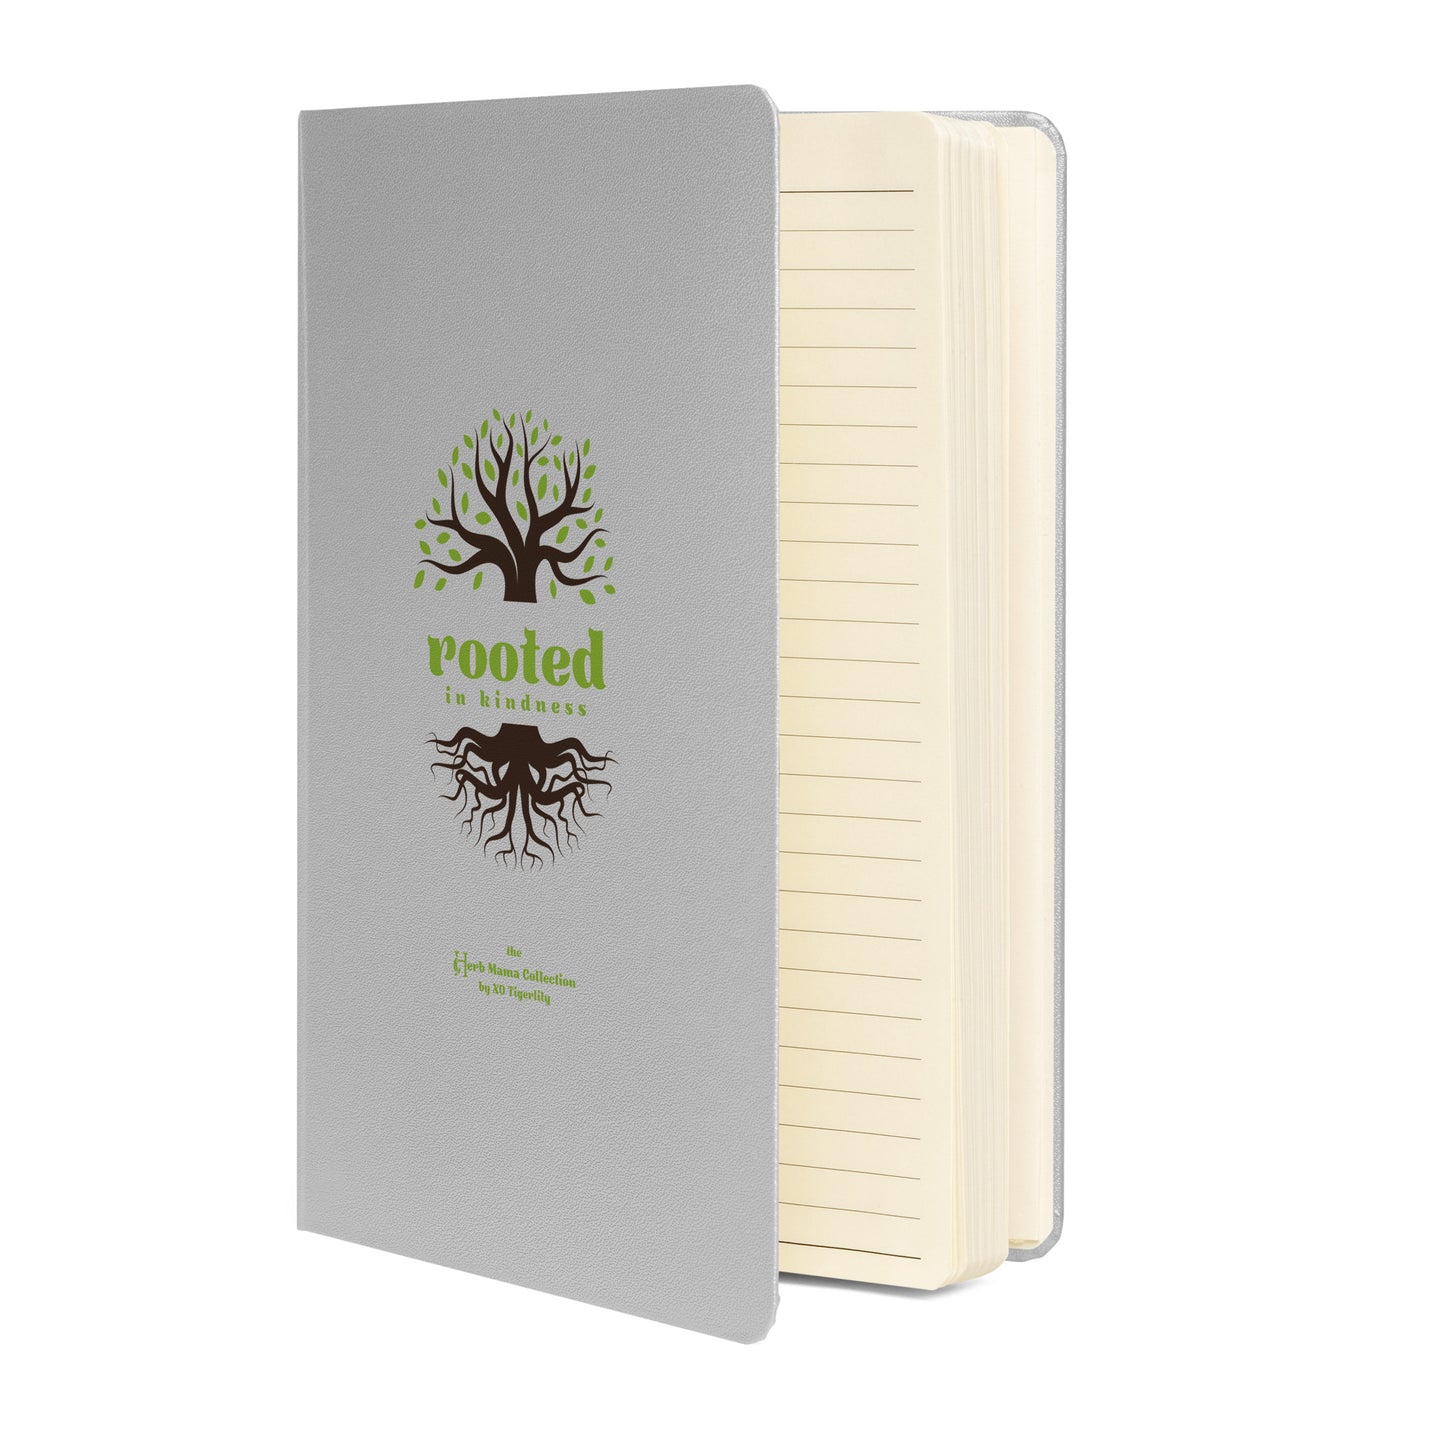 Rooted in Kindness Hardcover Journal